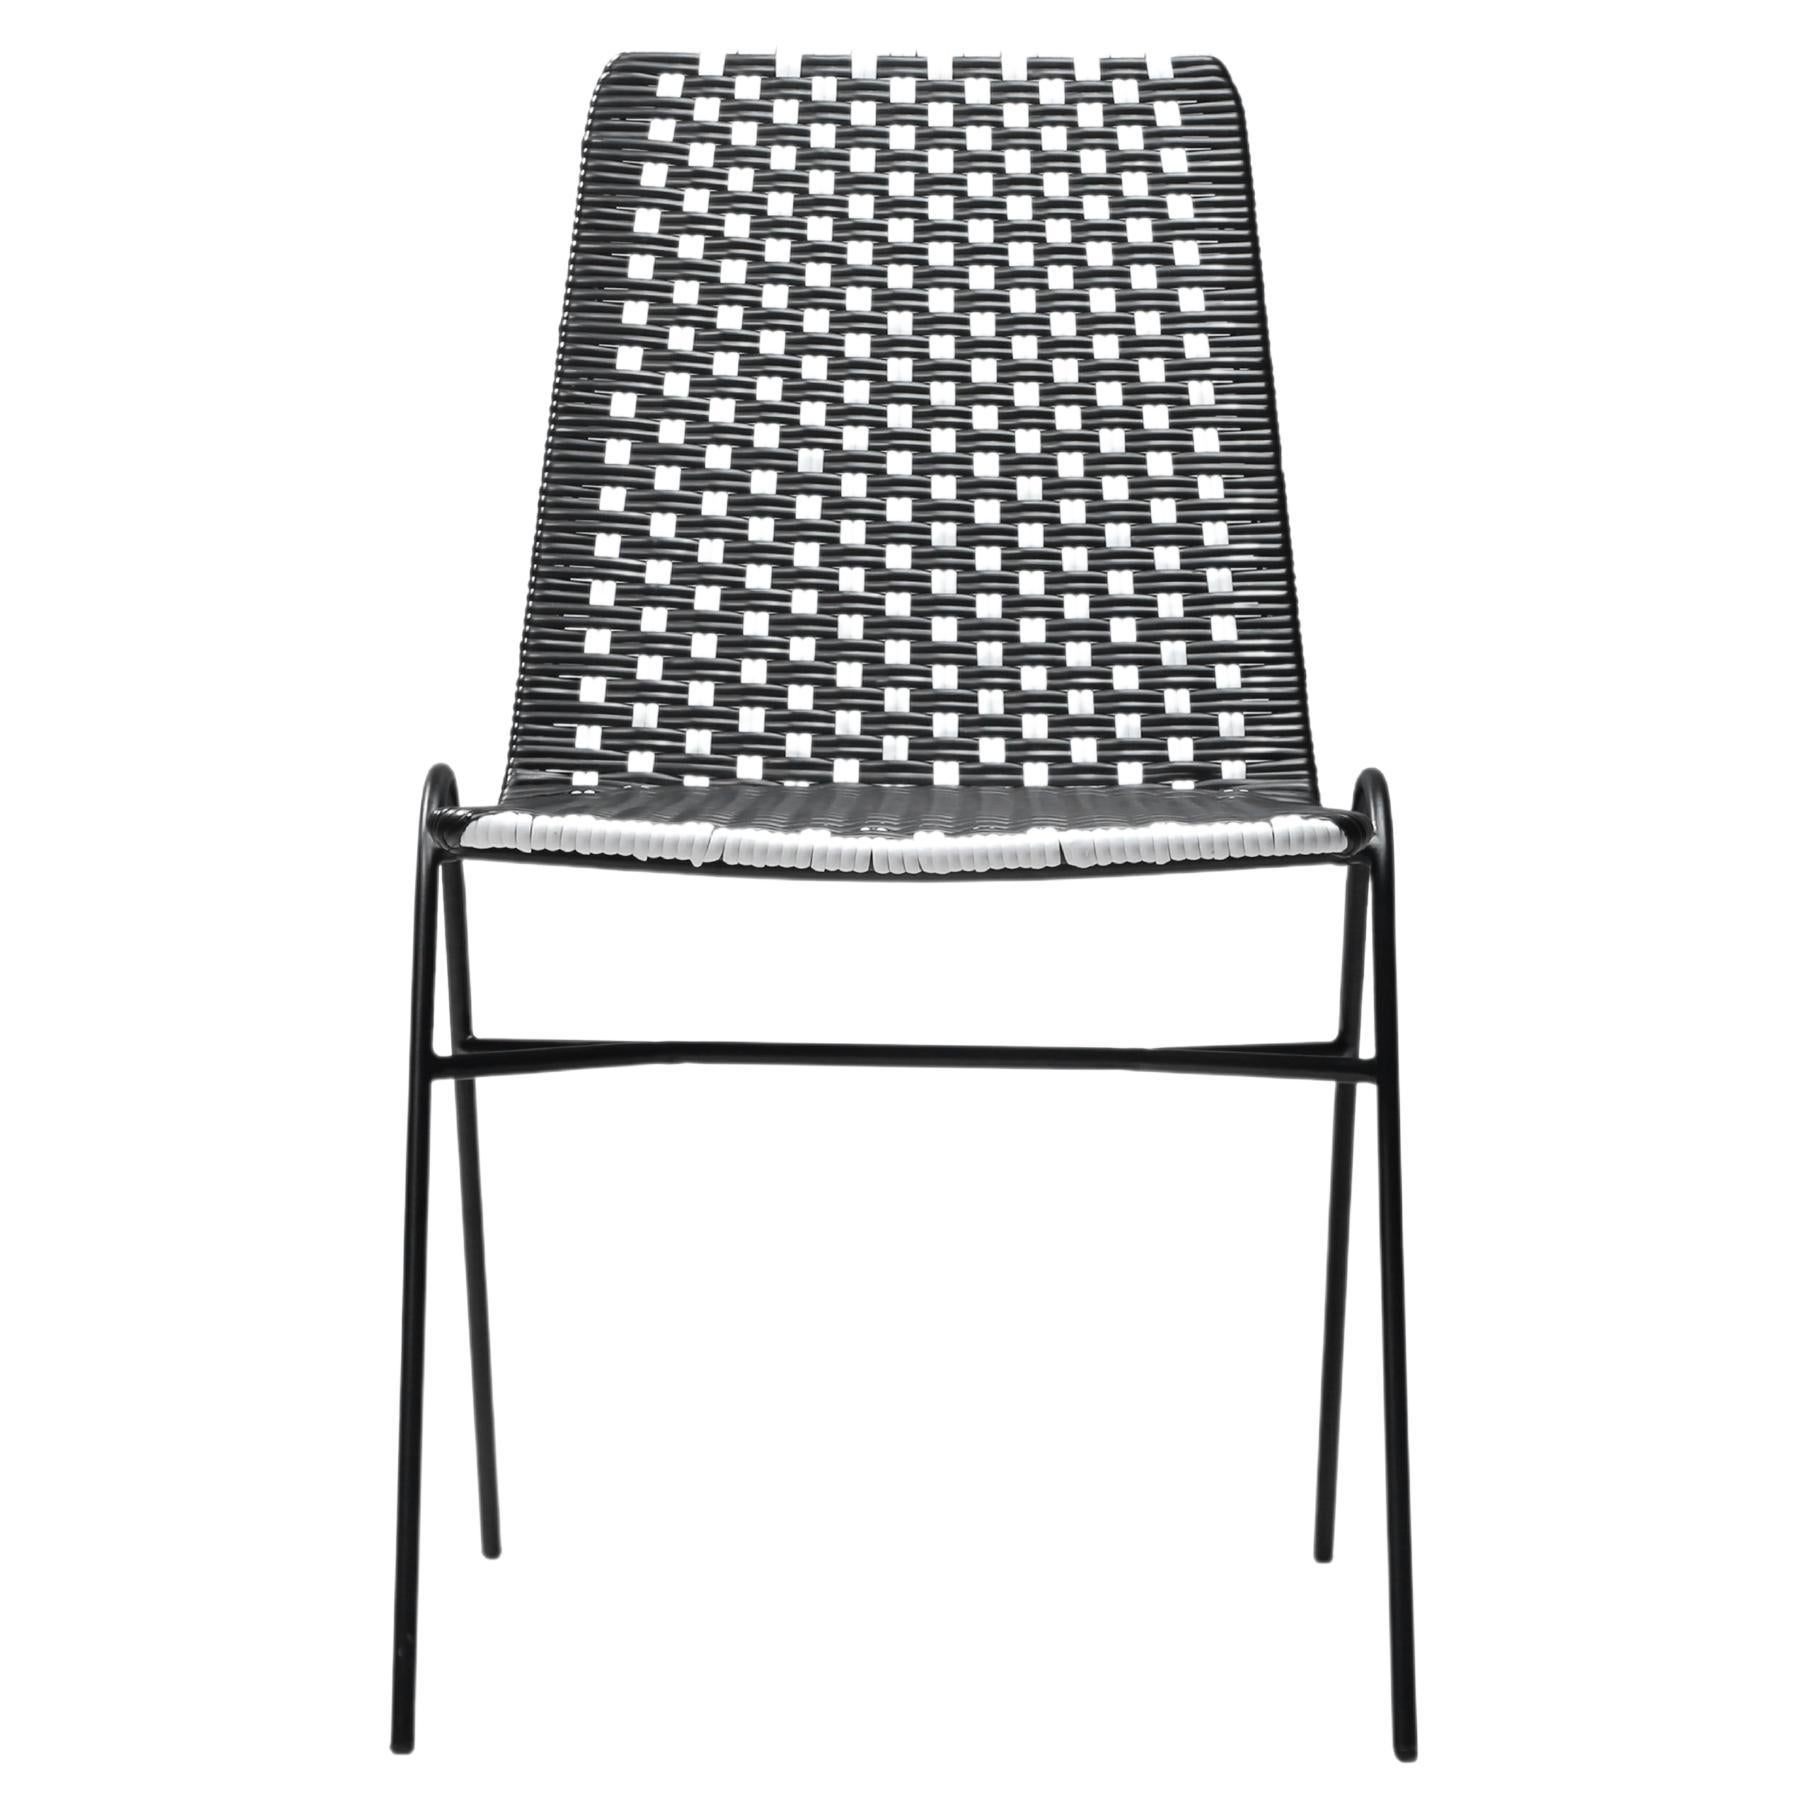 Indoor and Outdoor Stackable Monochrome Patio Dining Chair by Frida & Blu